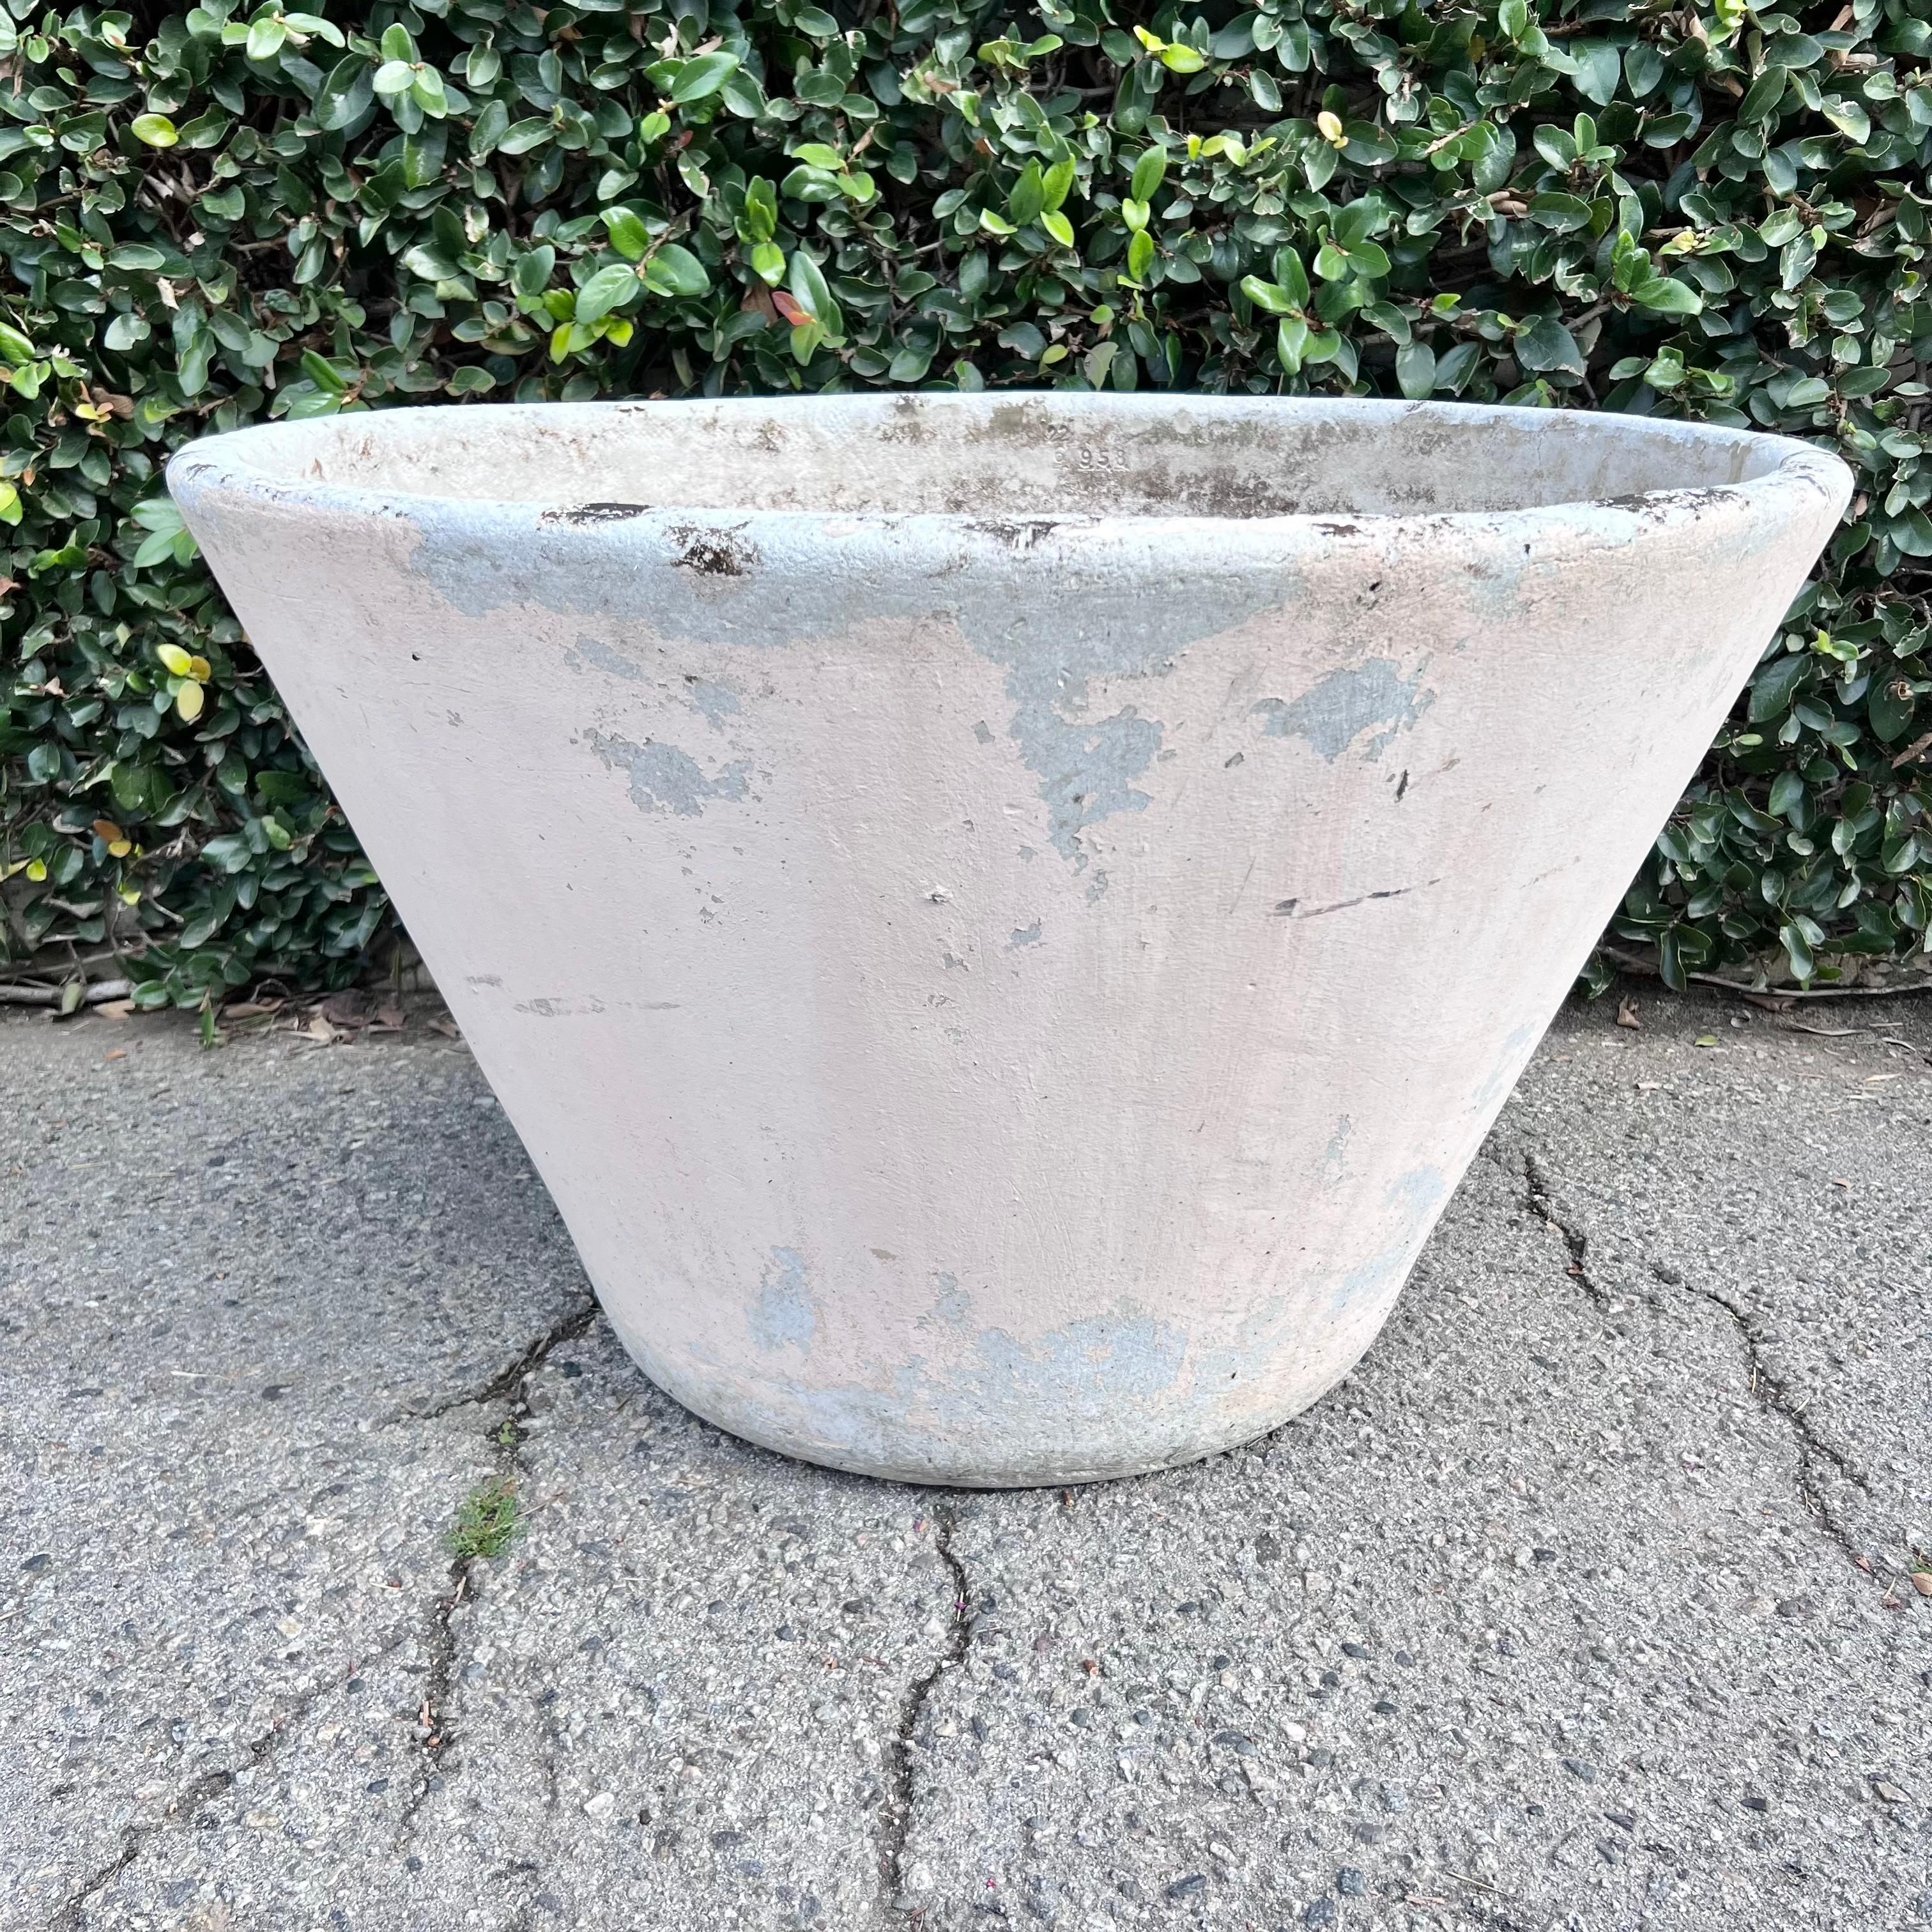 Massive concrete tree planters by Willy Guhl. Stunning size and color. Largest sized Willy Guhl planters ever made. Peach paint from years ago with natural patina. Able to plant a large sized tree. Great vintage condition with wear and superficial